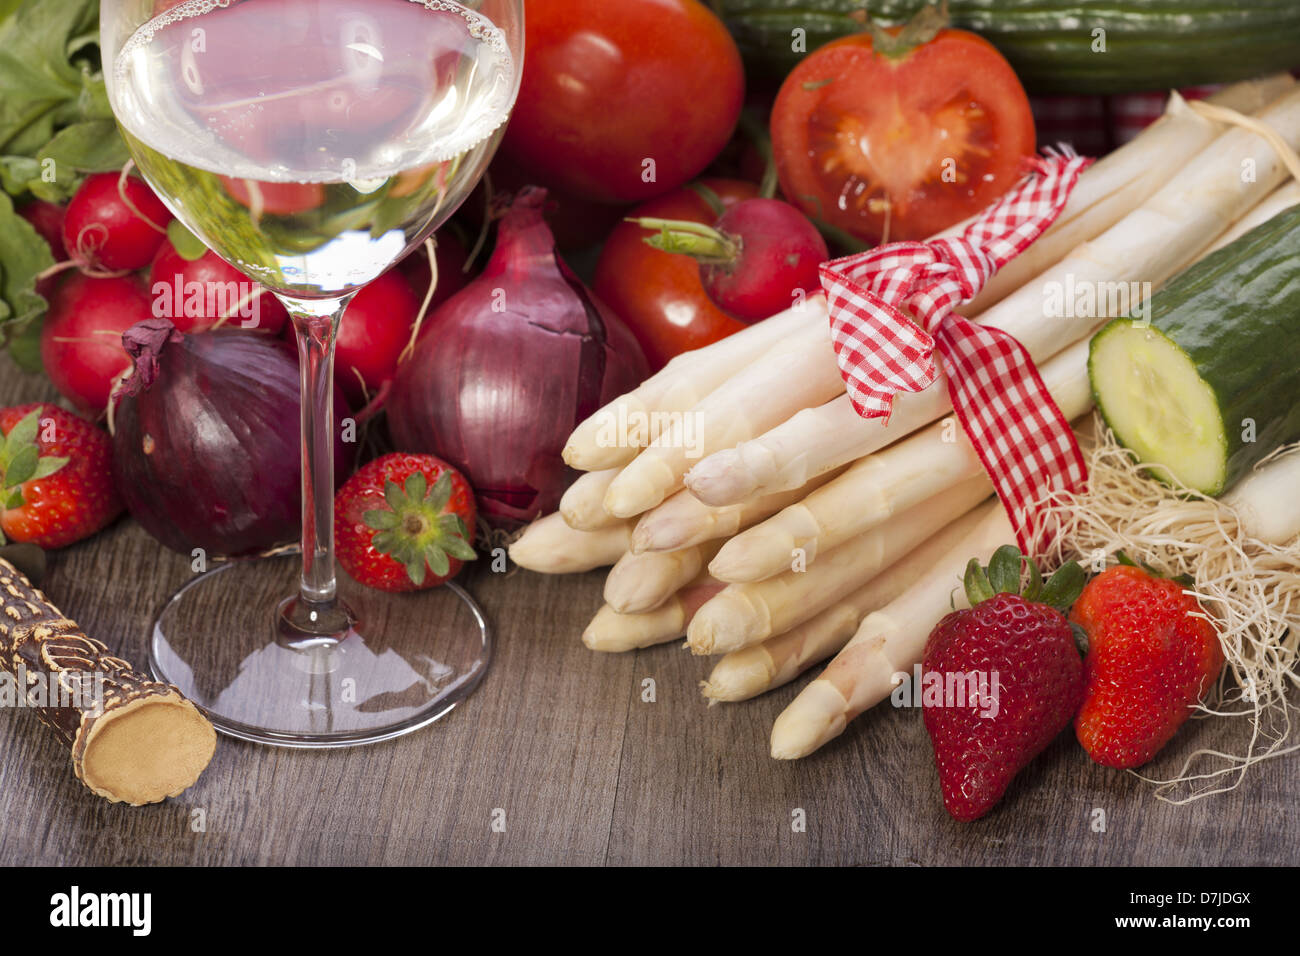 Fresh vegetables and seasonal ingredients with asparagus, onions, tomatoes a glass of white wine on a wooden background Stock Photo